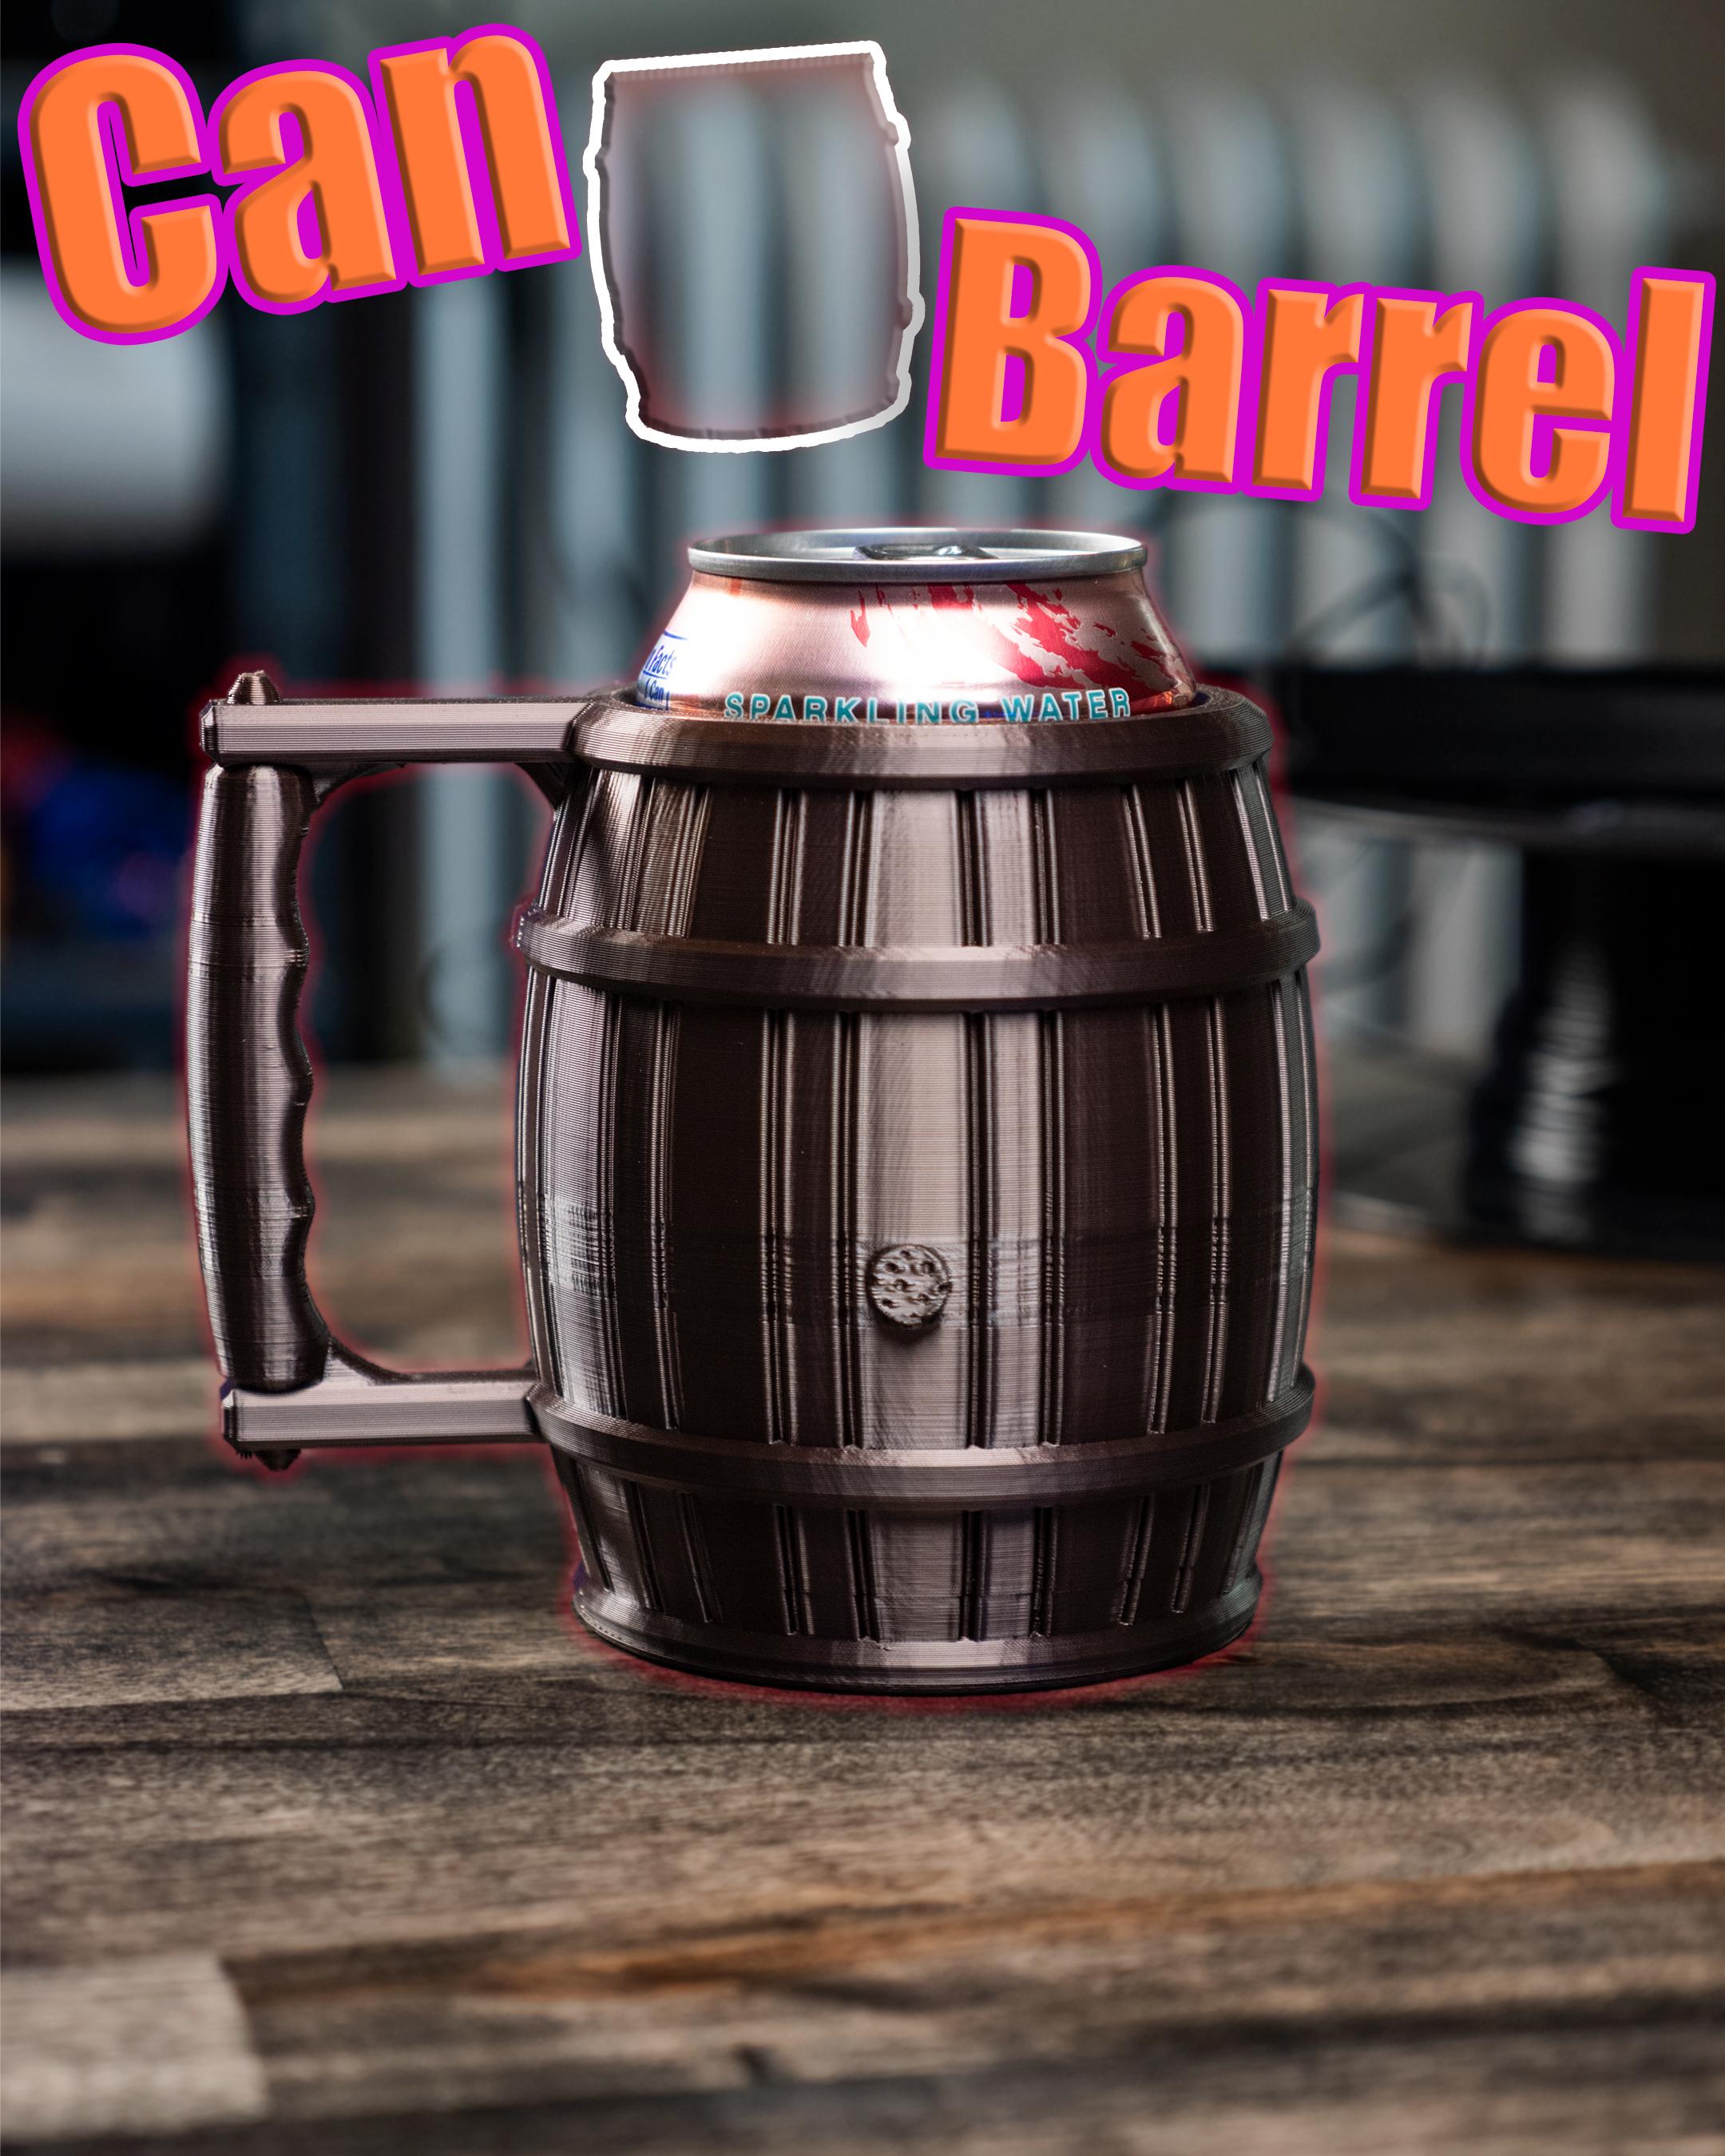 Root Beer Barrel - 12oz Can Coozie aka Stein for your Soda Pop Cans! - The "Root BEER Barrel" for 12oz Can Holding! - 3d model